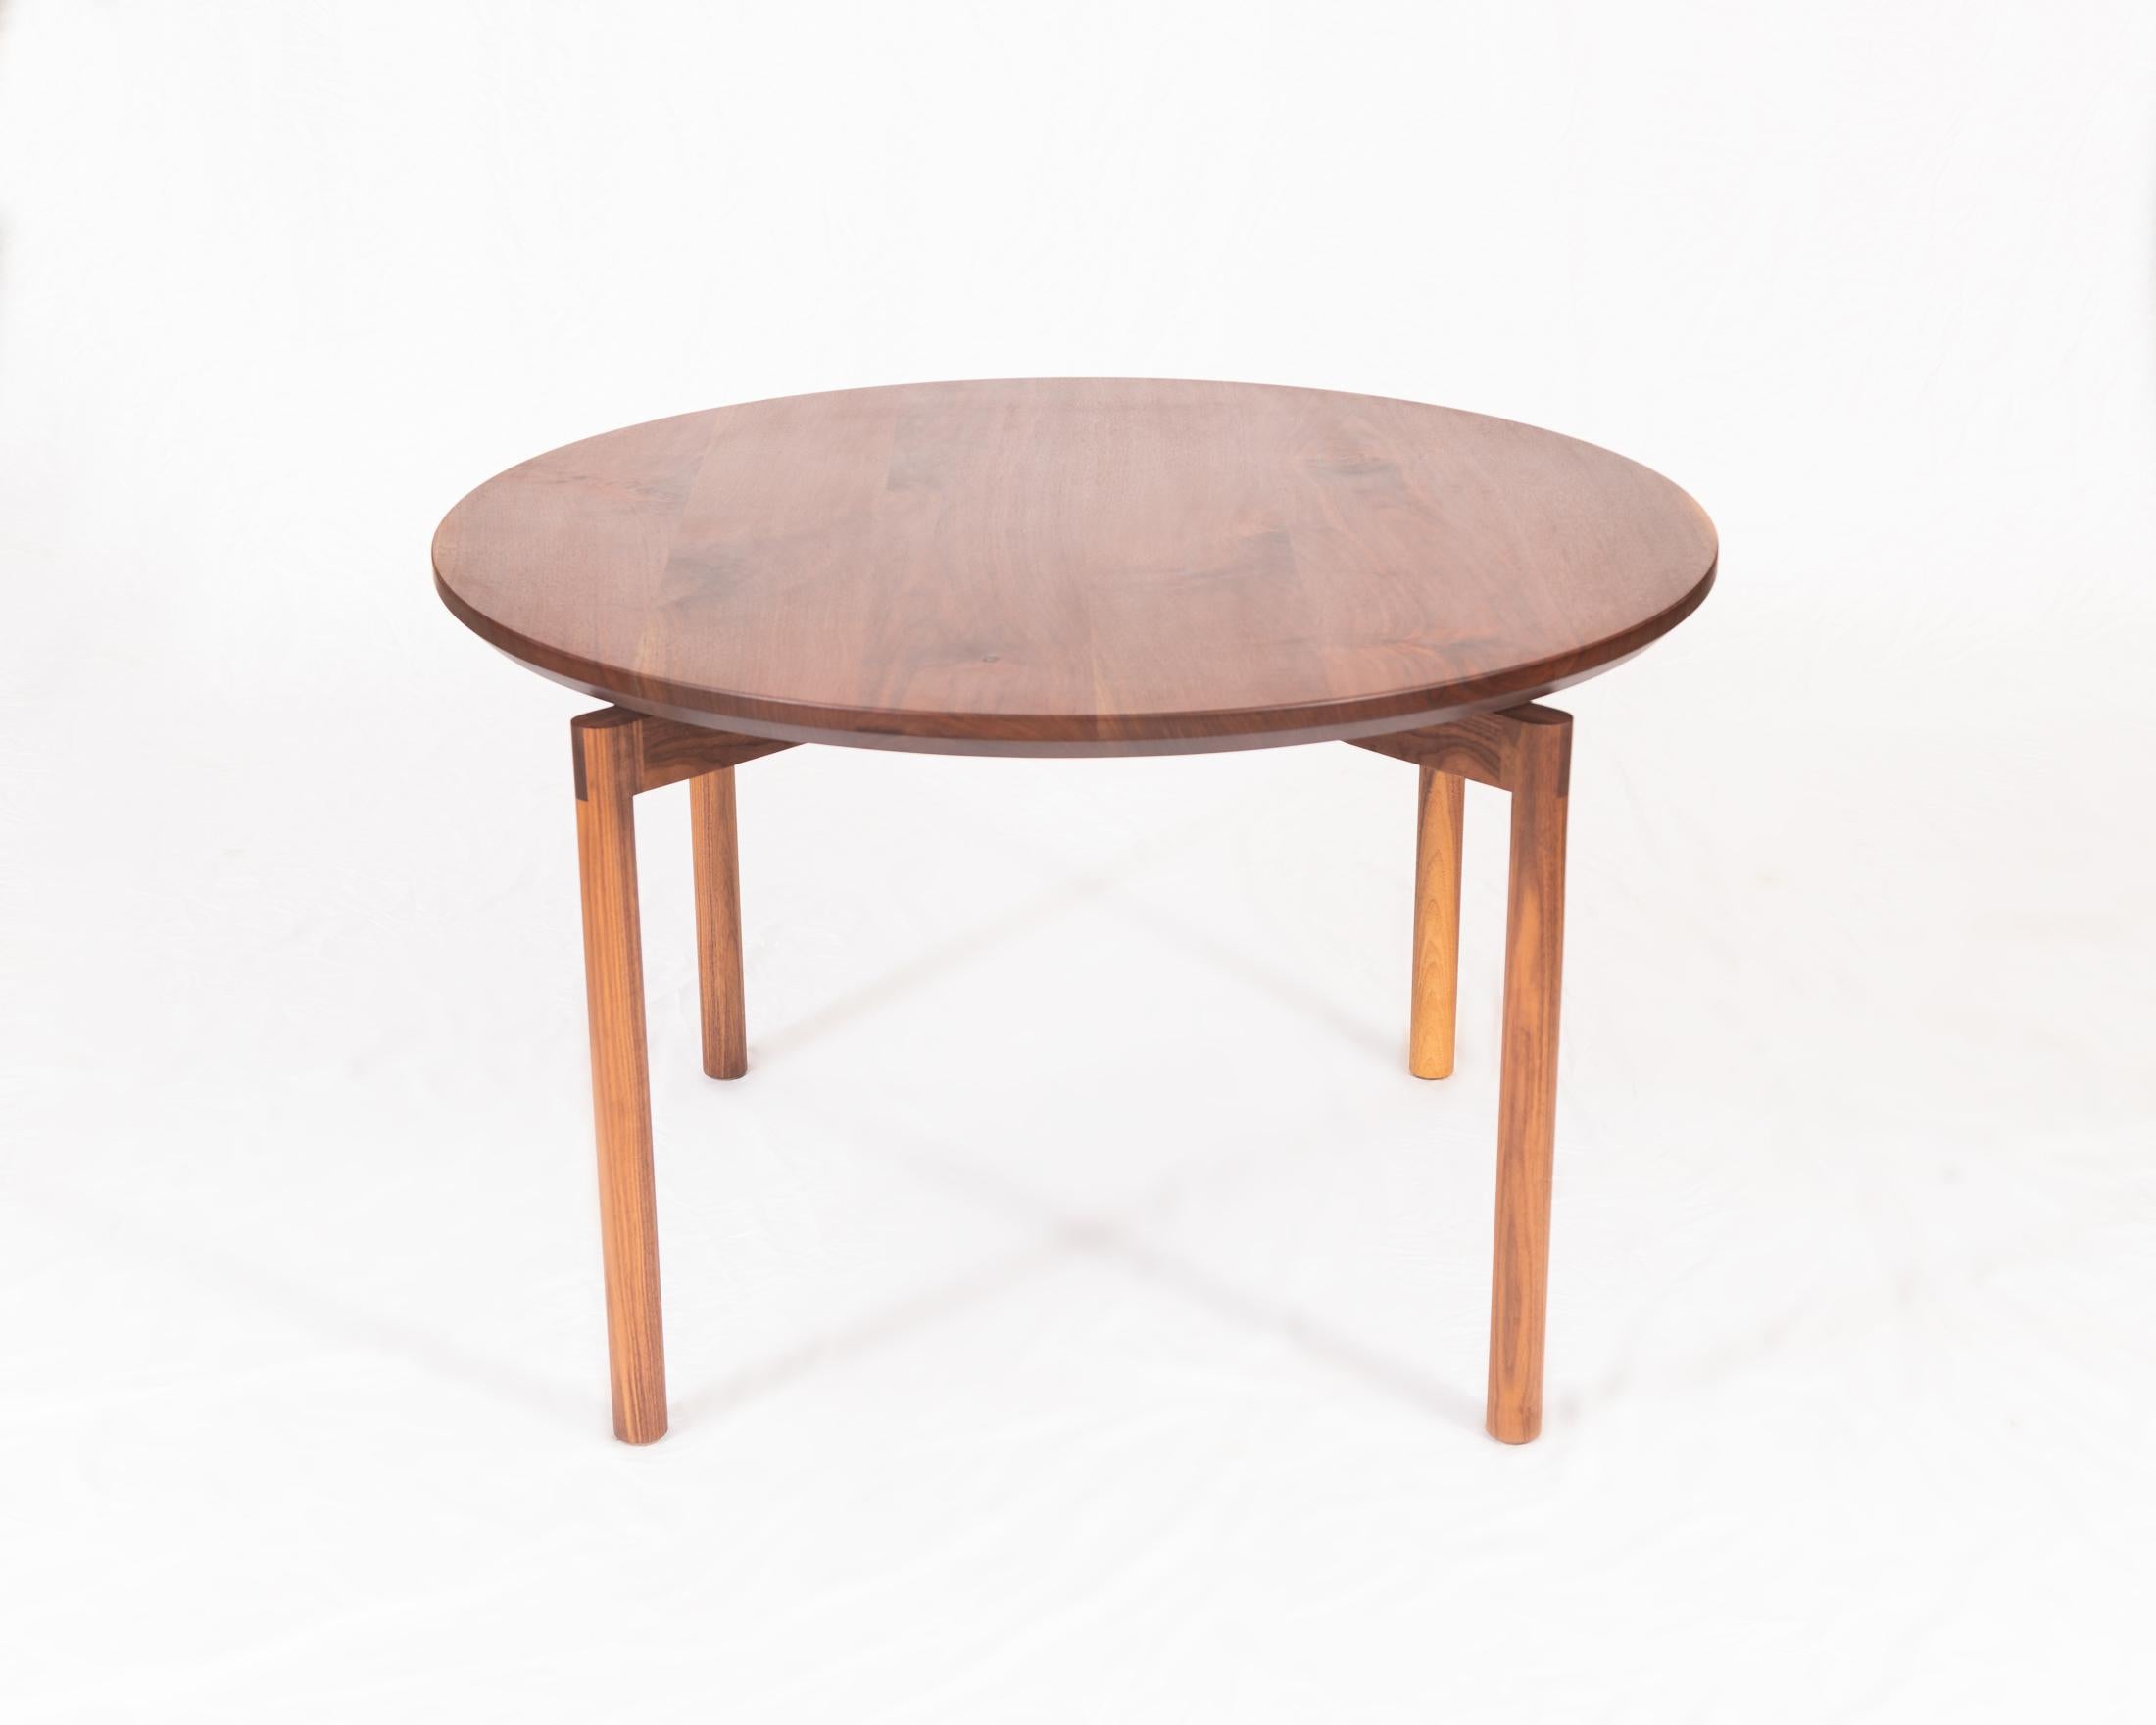 Enso Table, Walnut Dining Table with Knife-Edge and Exposed Joinery In New Condition For Sale In Chattanooga, TN